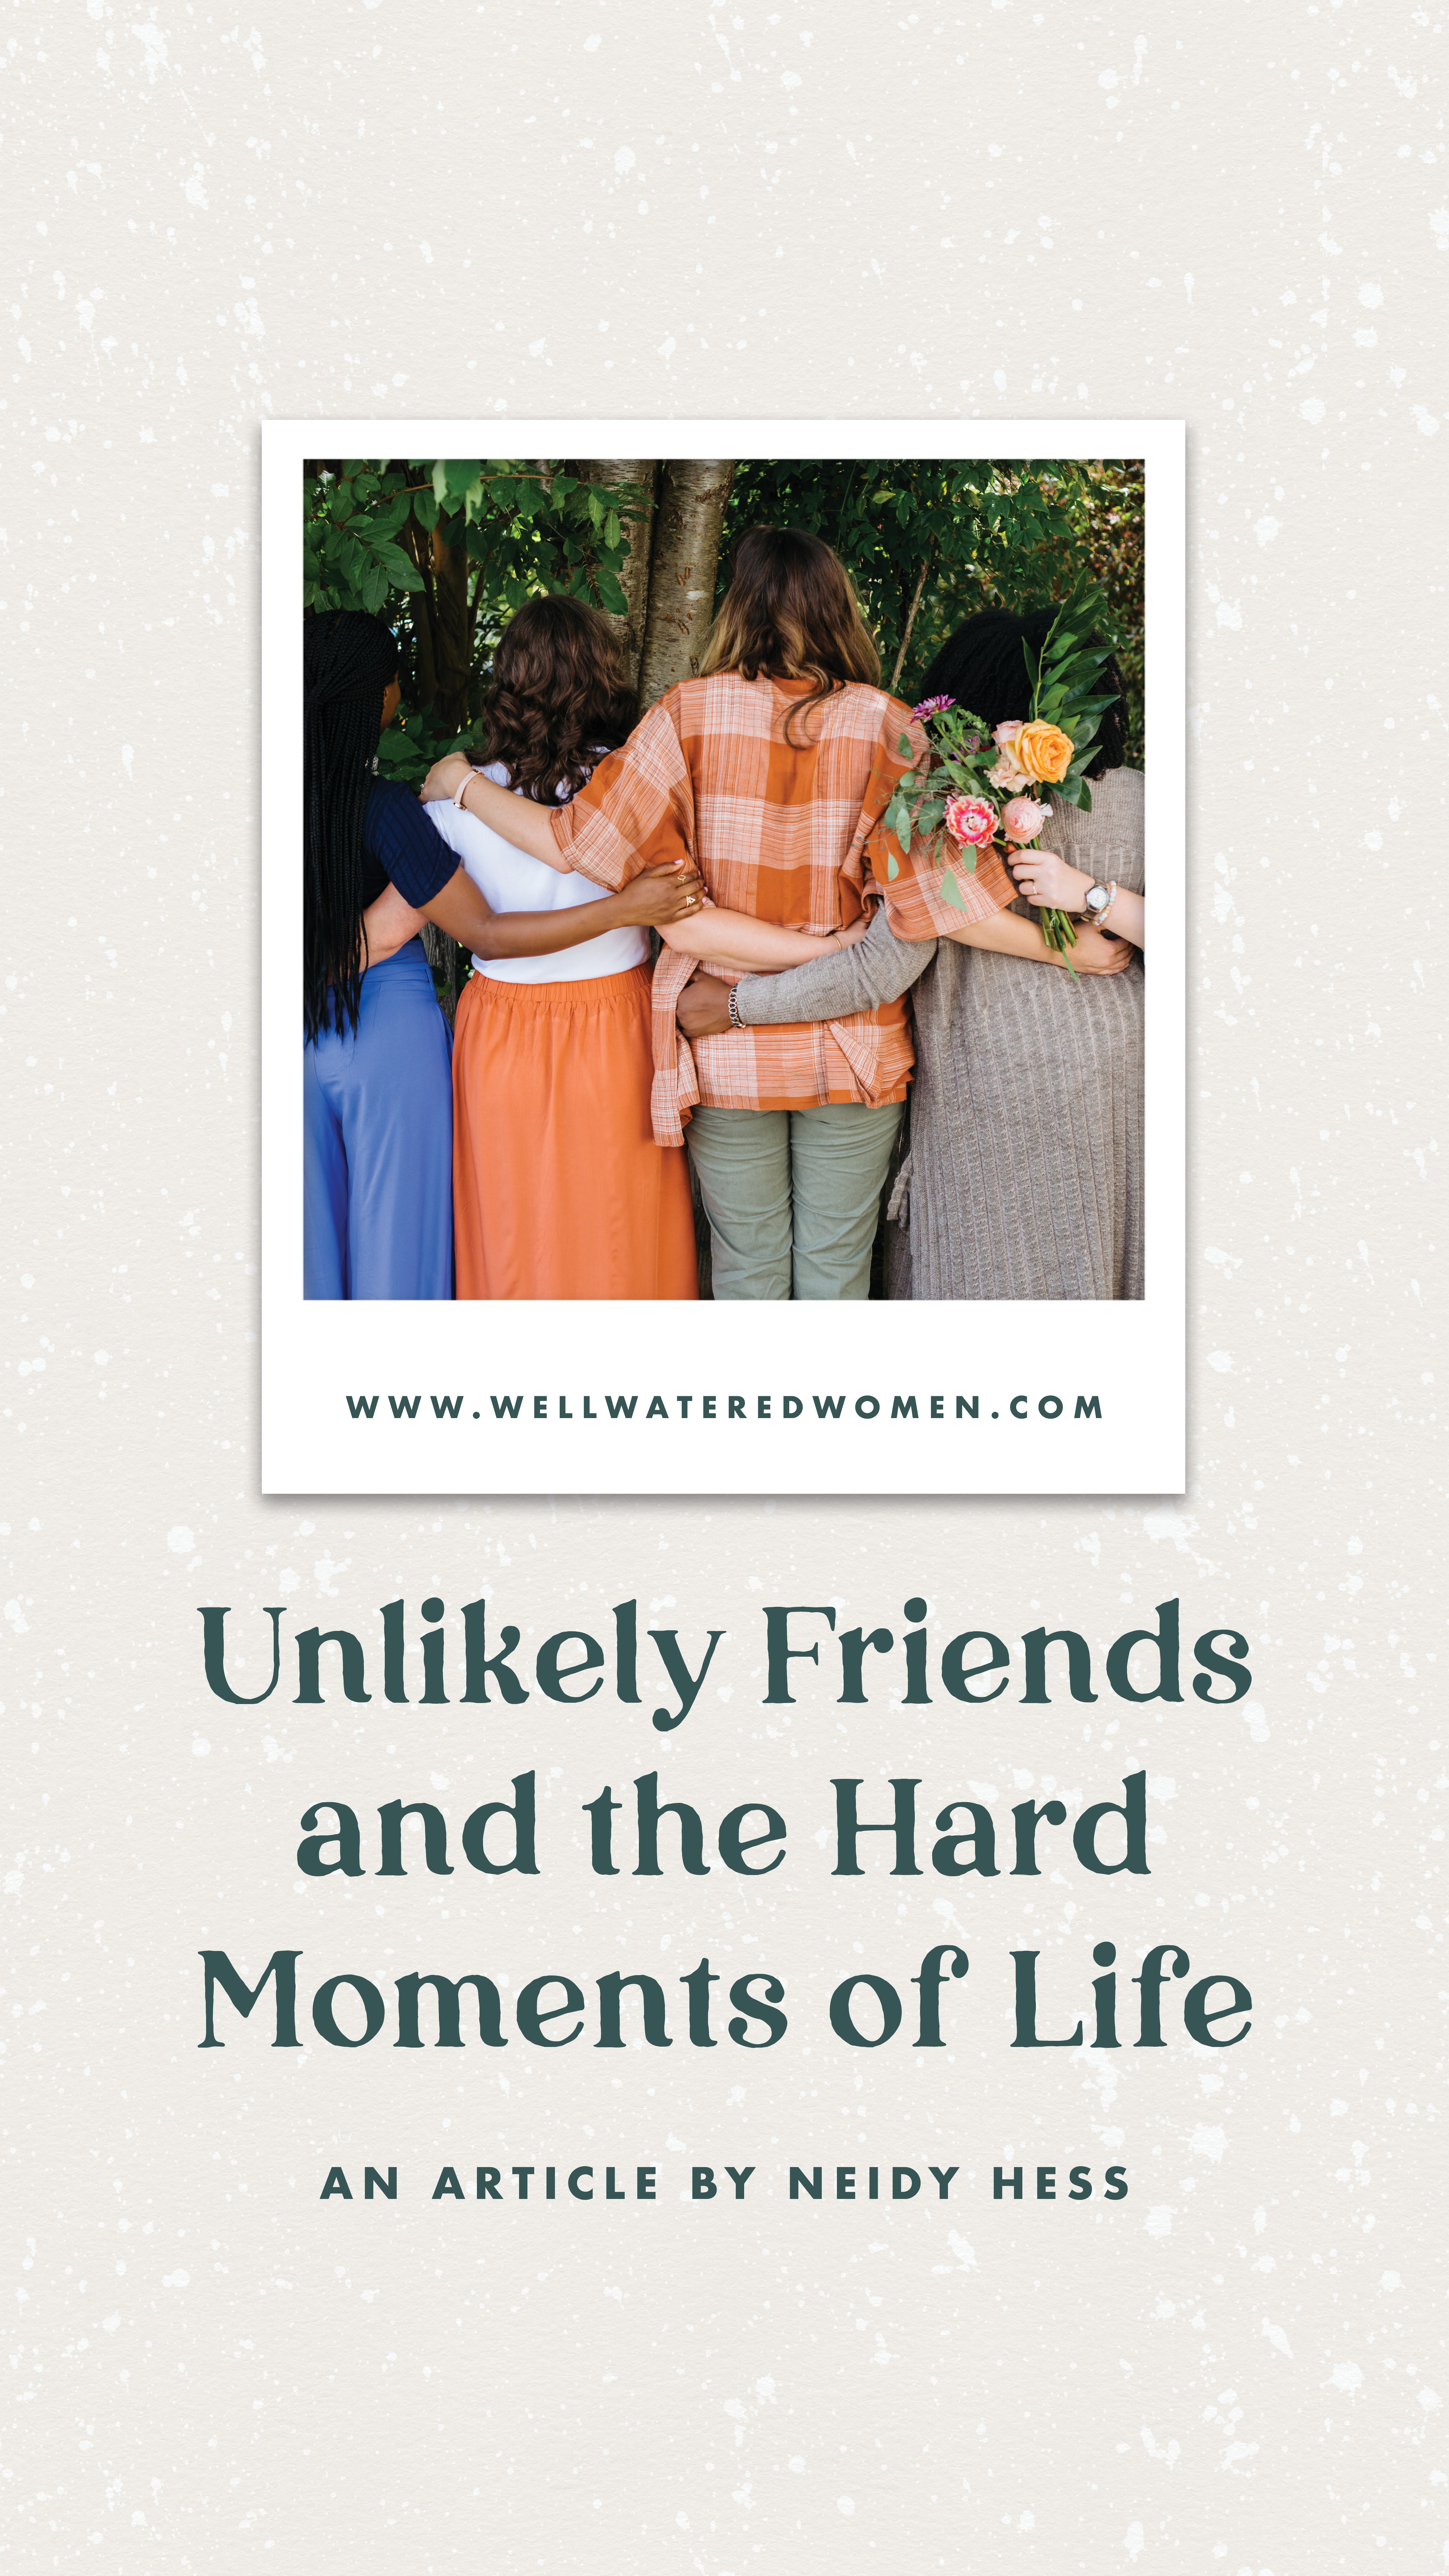 Unlikely Friends and the Hard Moments of Life-An Article by Neidy Hess